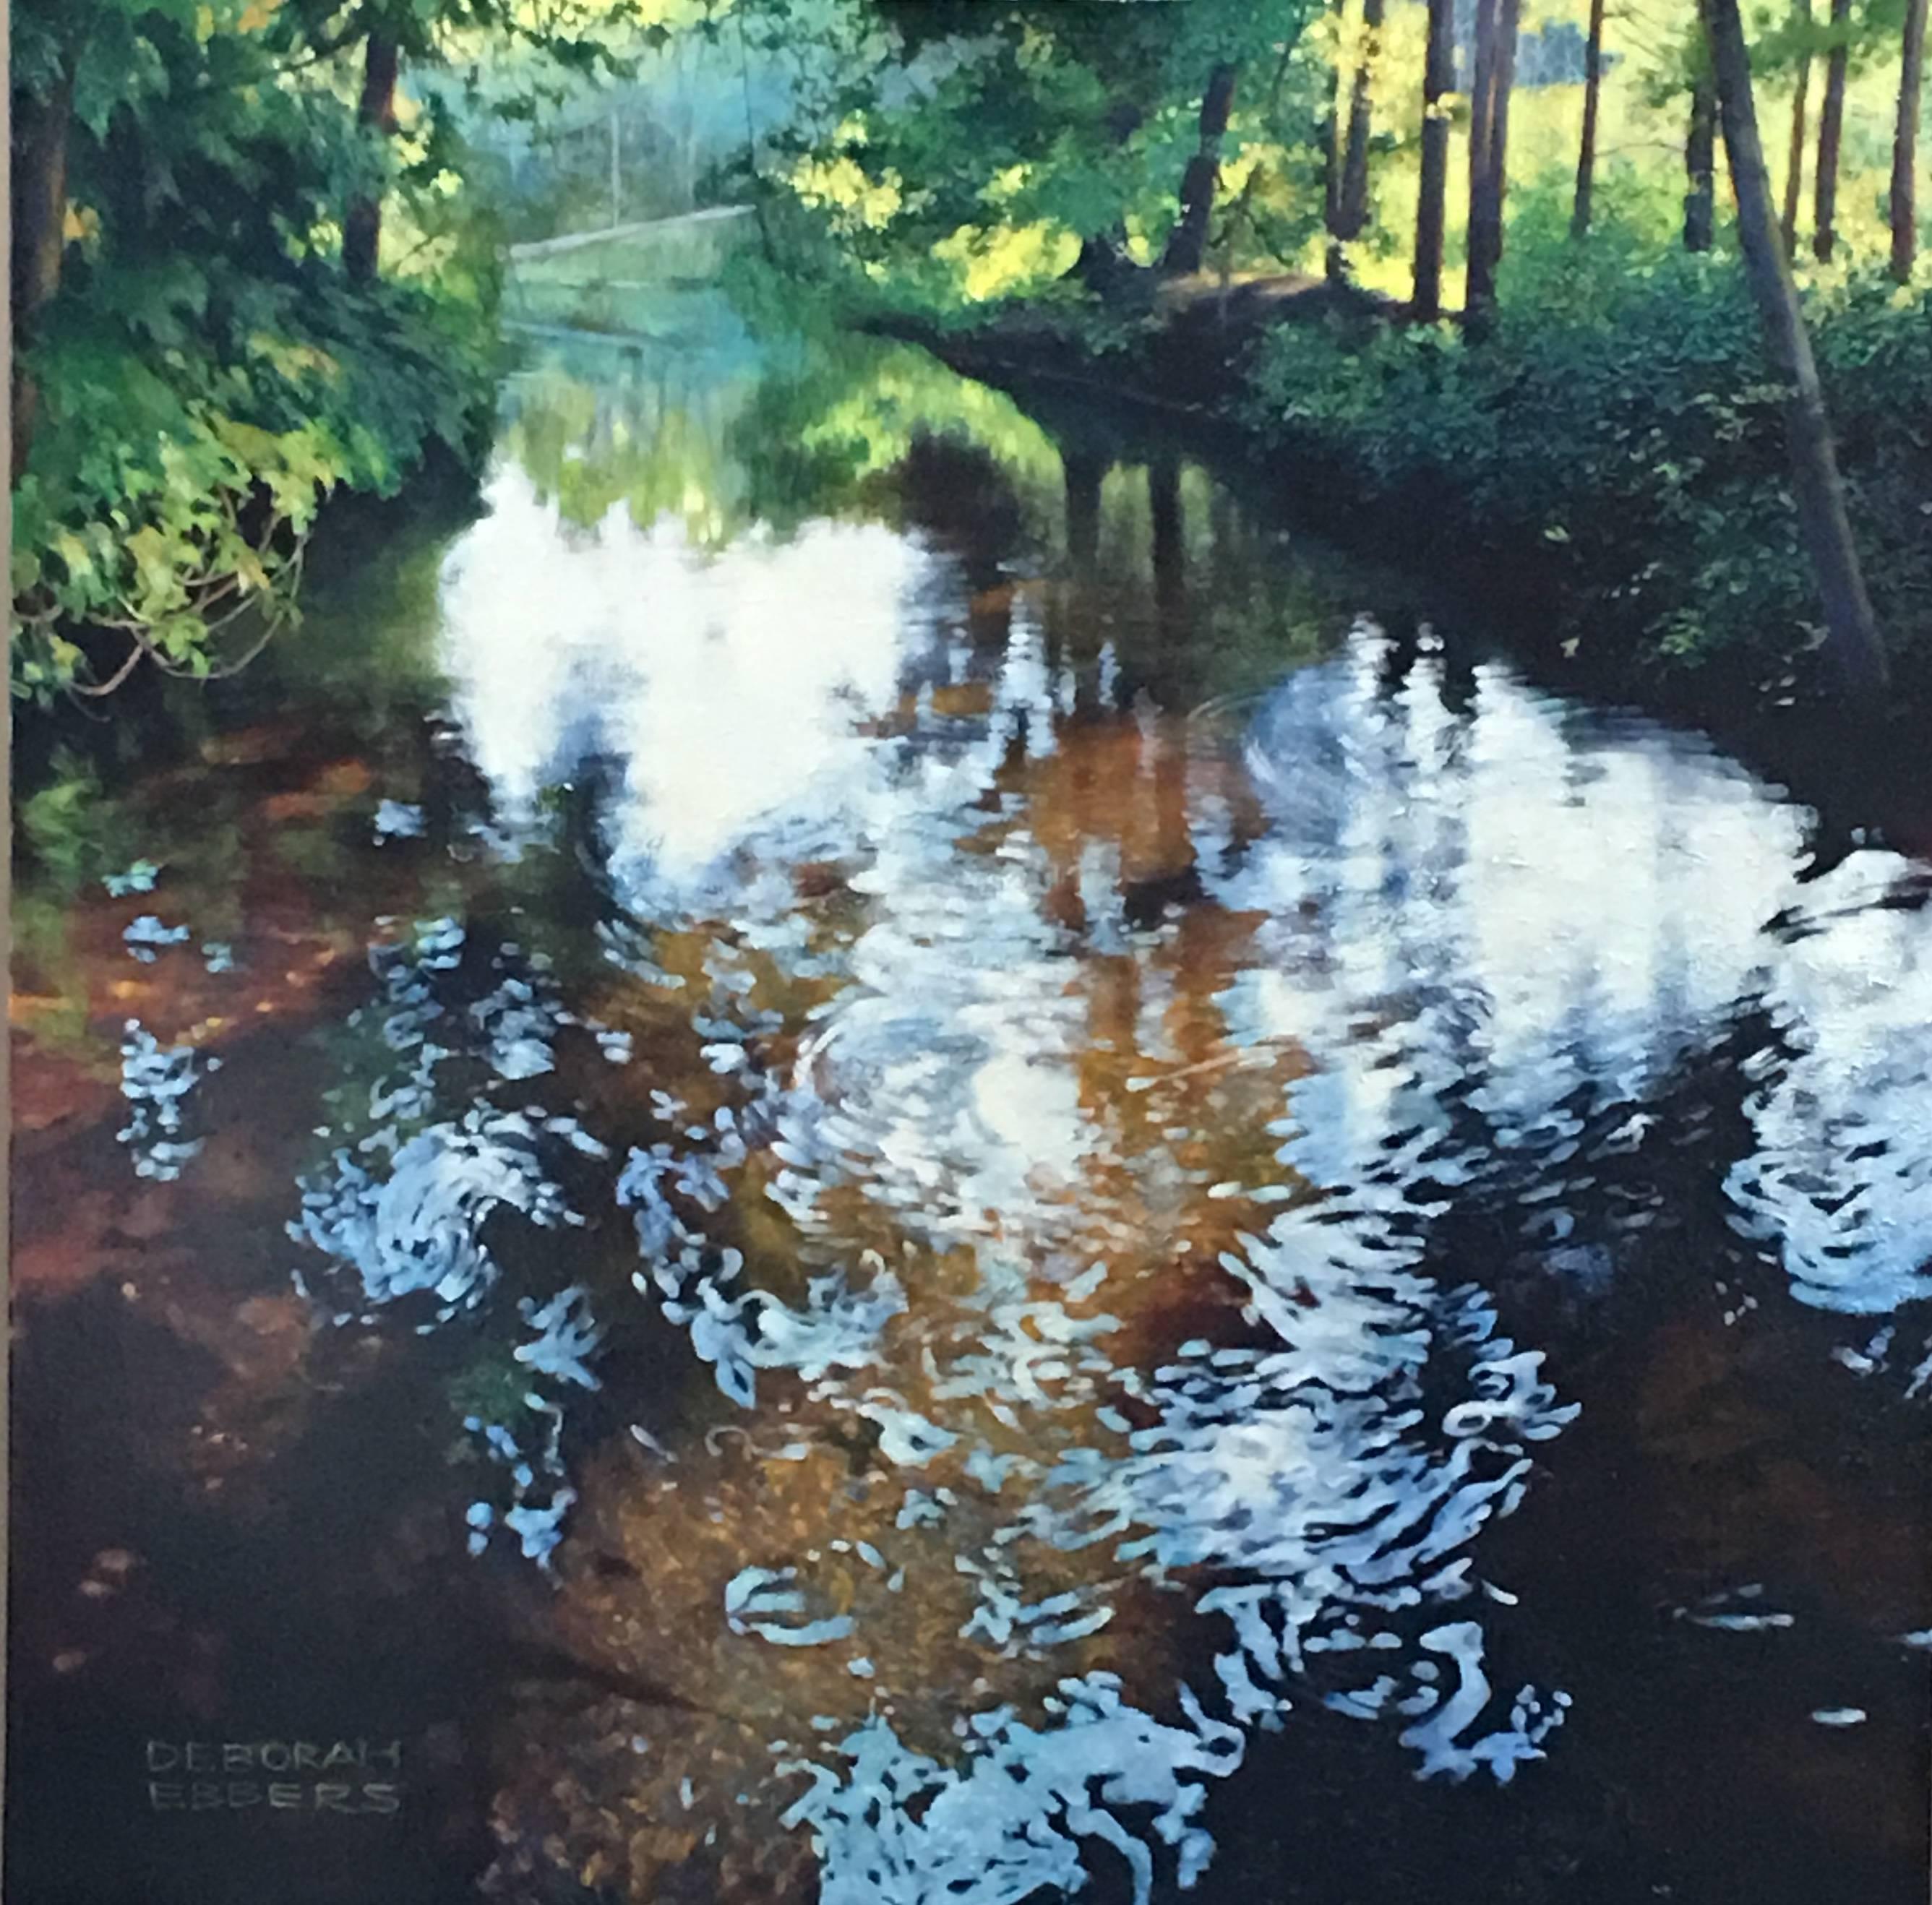 Deborah Ebbers Landscape Painting - Light Play - Oil on Canvas Painting of Water and Trees with Reflecting Light